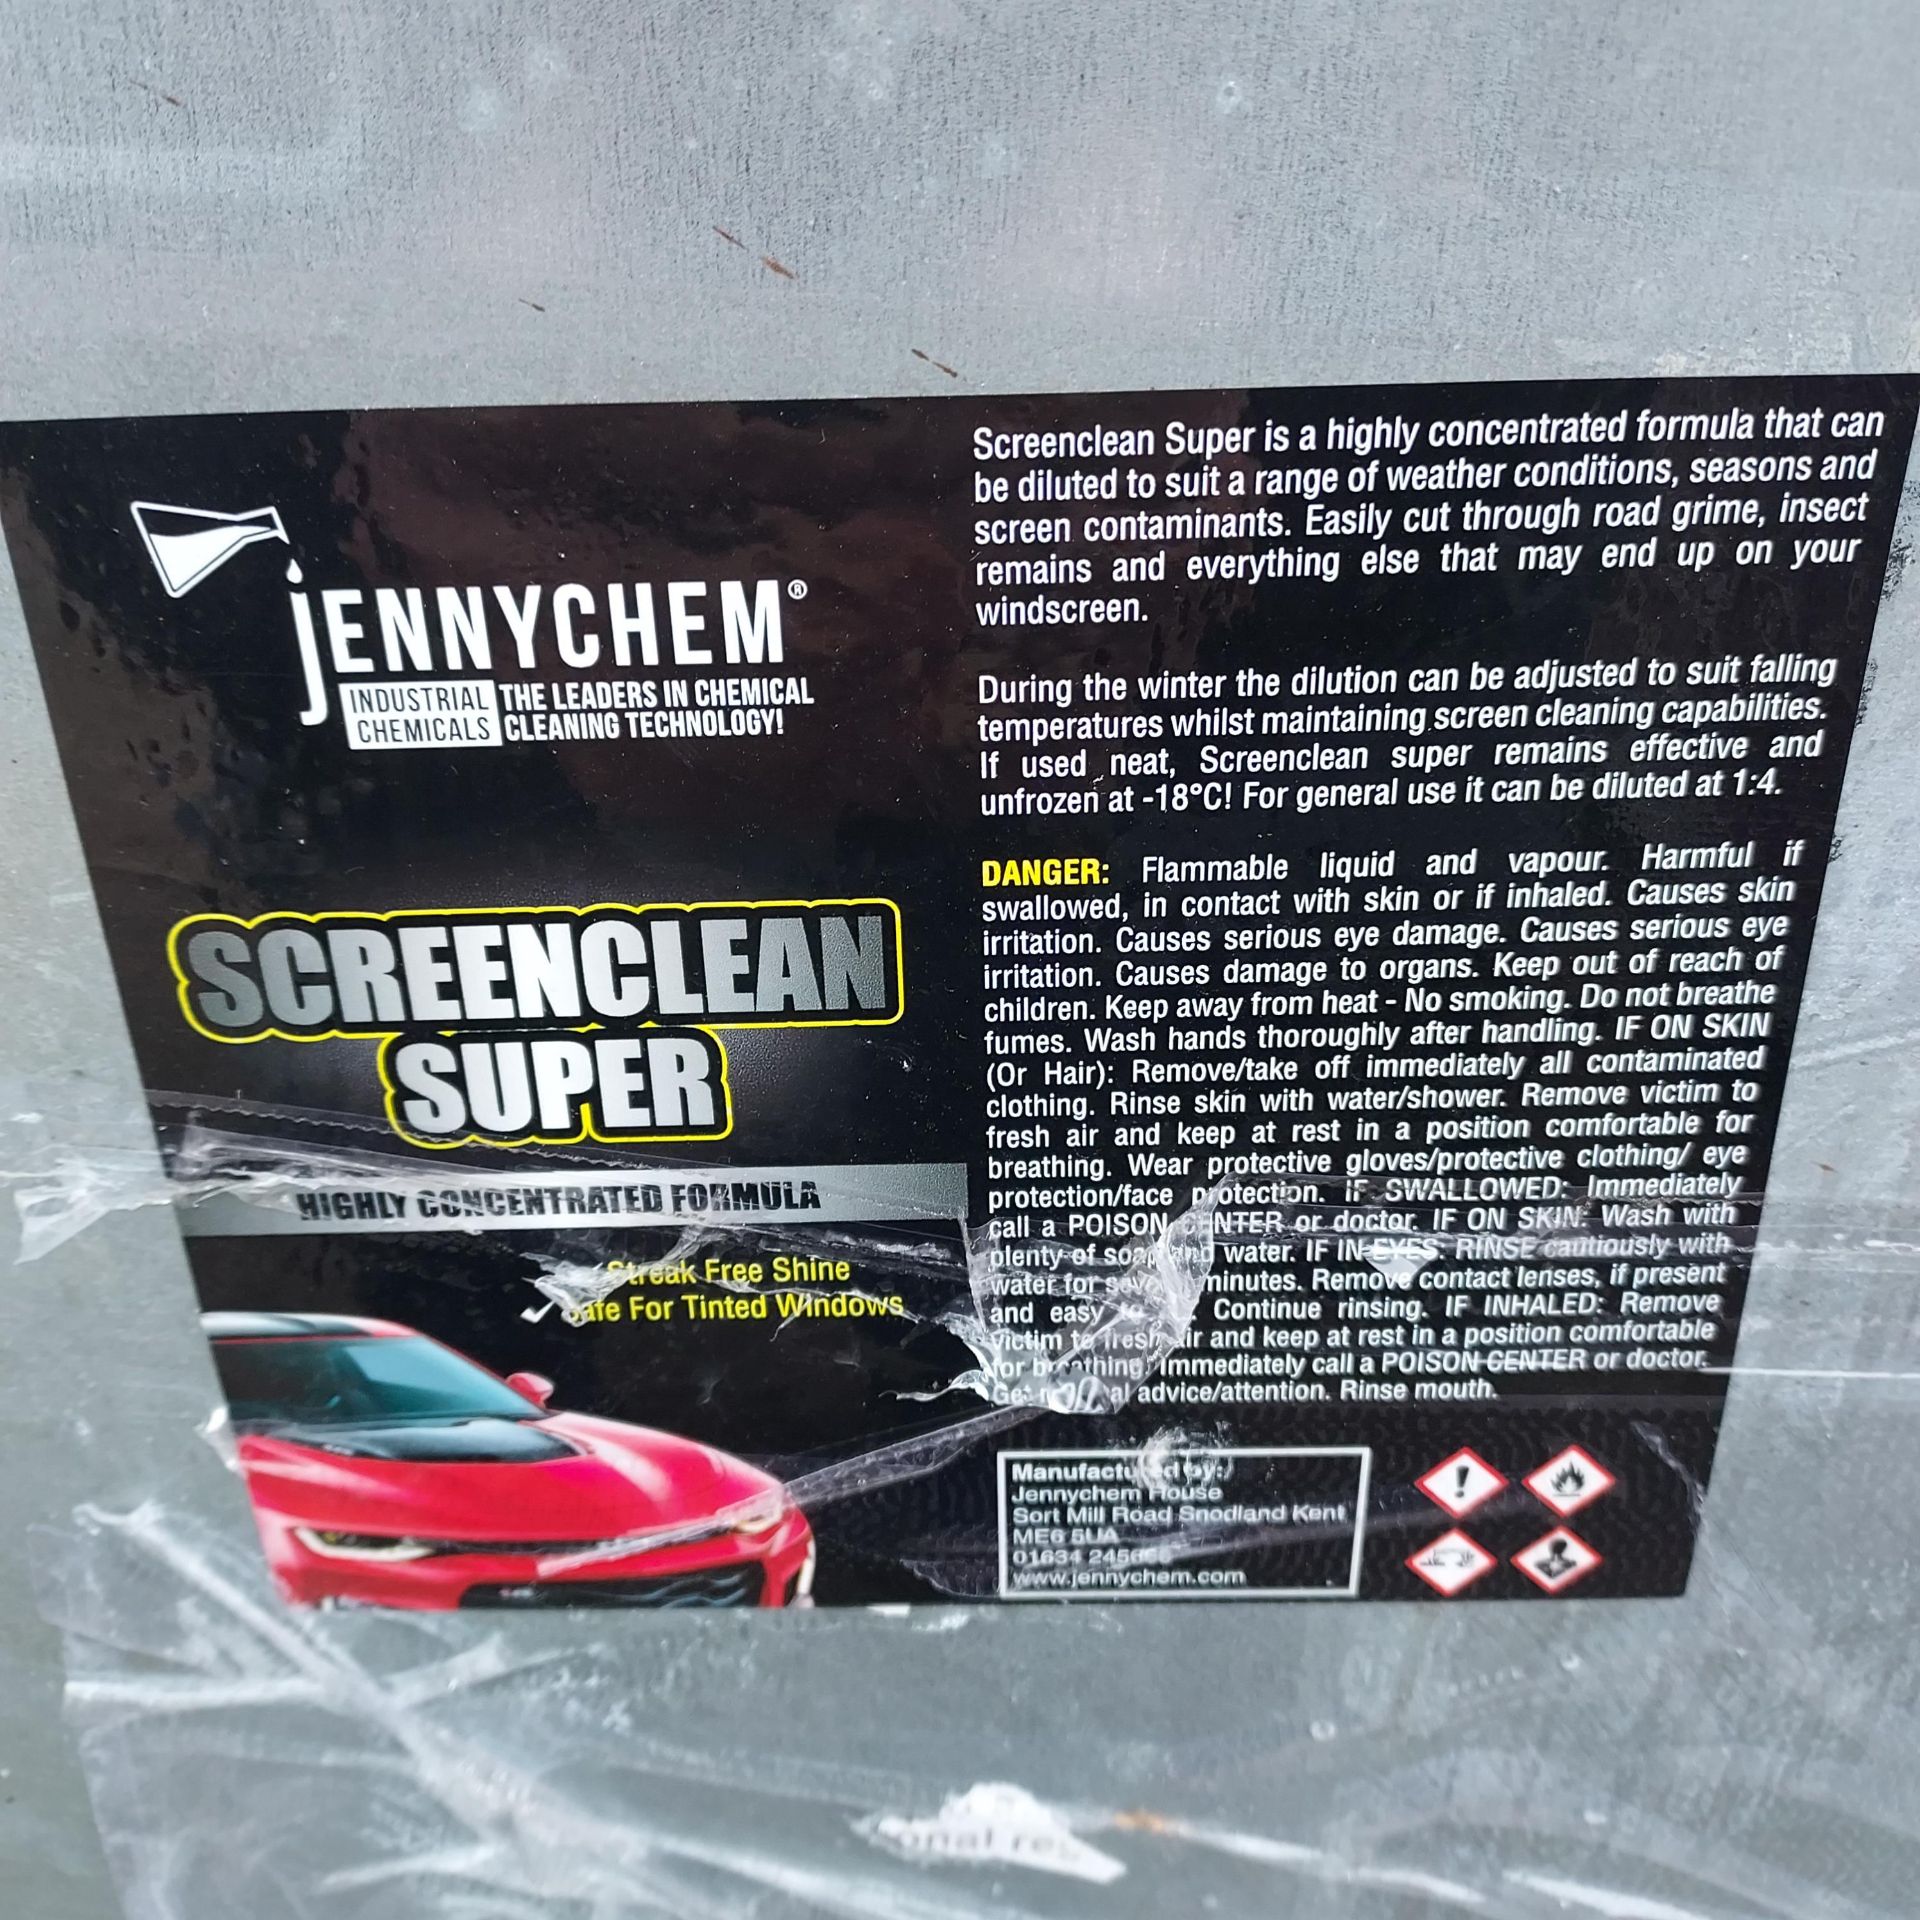 1000 LITRE BRAND NEW SCREENCLEAN SUPER - HIGHLY CONCENTRATED FORMULA - STREAK FREE SHINE - SAFE - Image 2 of 2